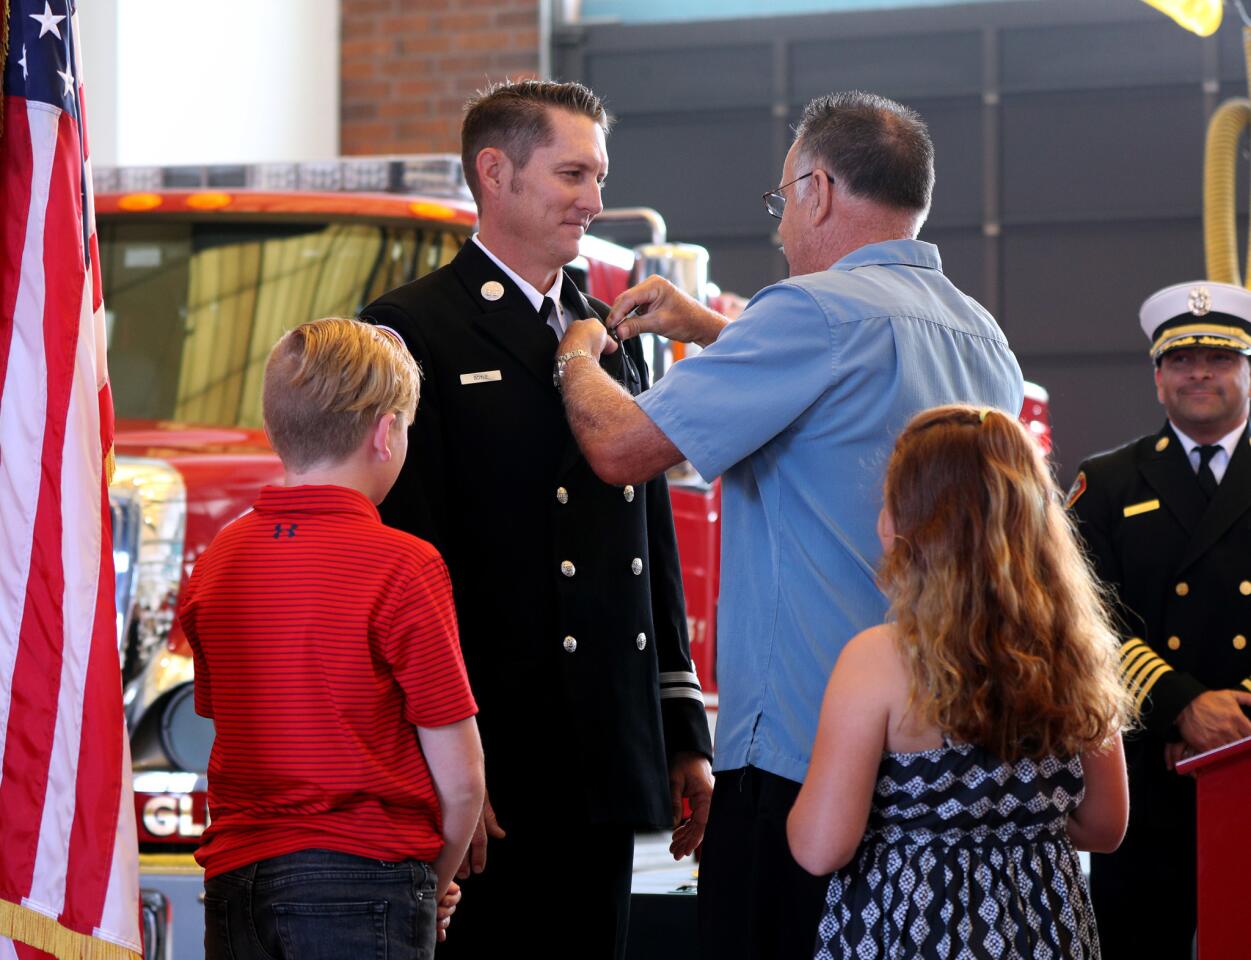 Newly-promoted Glendale Fire Dept. captain Brad Boyle gets pinned by his father Jim Boyle as his children Braxton, left, and Brielle, right, look on during Promotion Ceremony at Station 21, in Glendale on Thursday, June 6, 2019. Eight fire dept. personnel were elevated in rank.